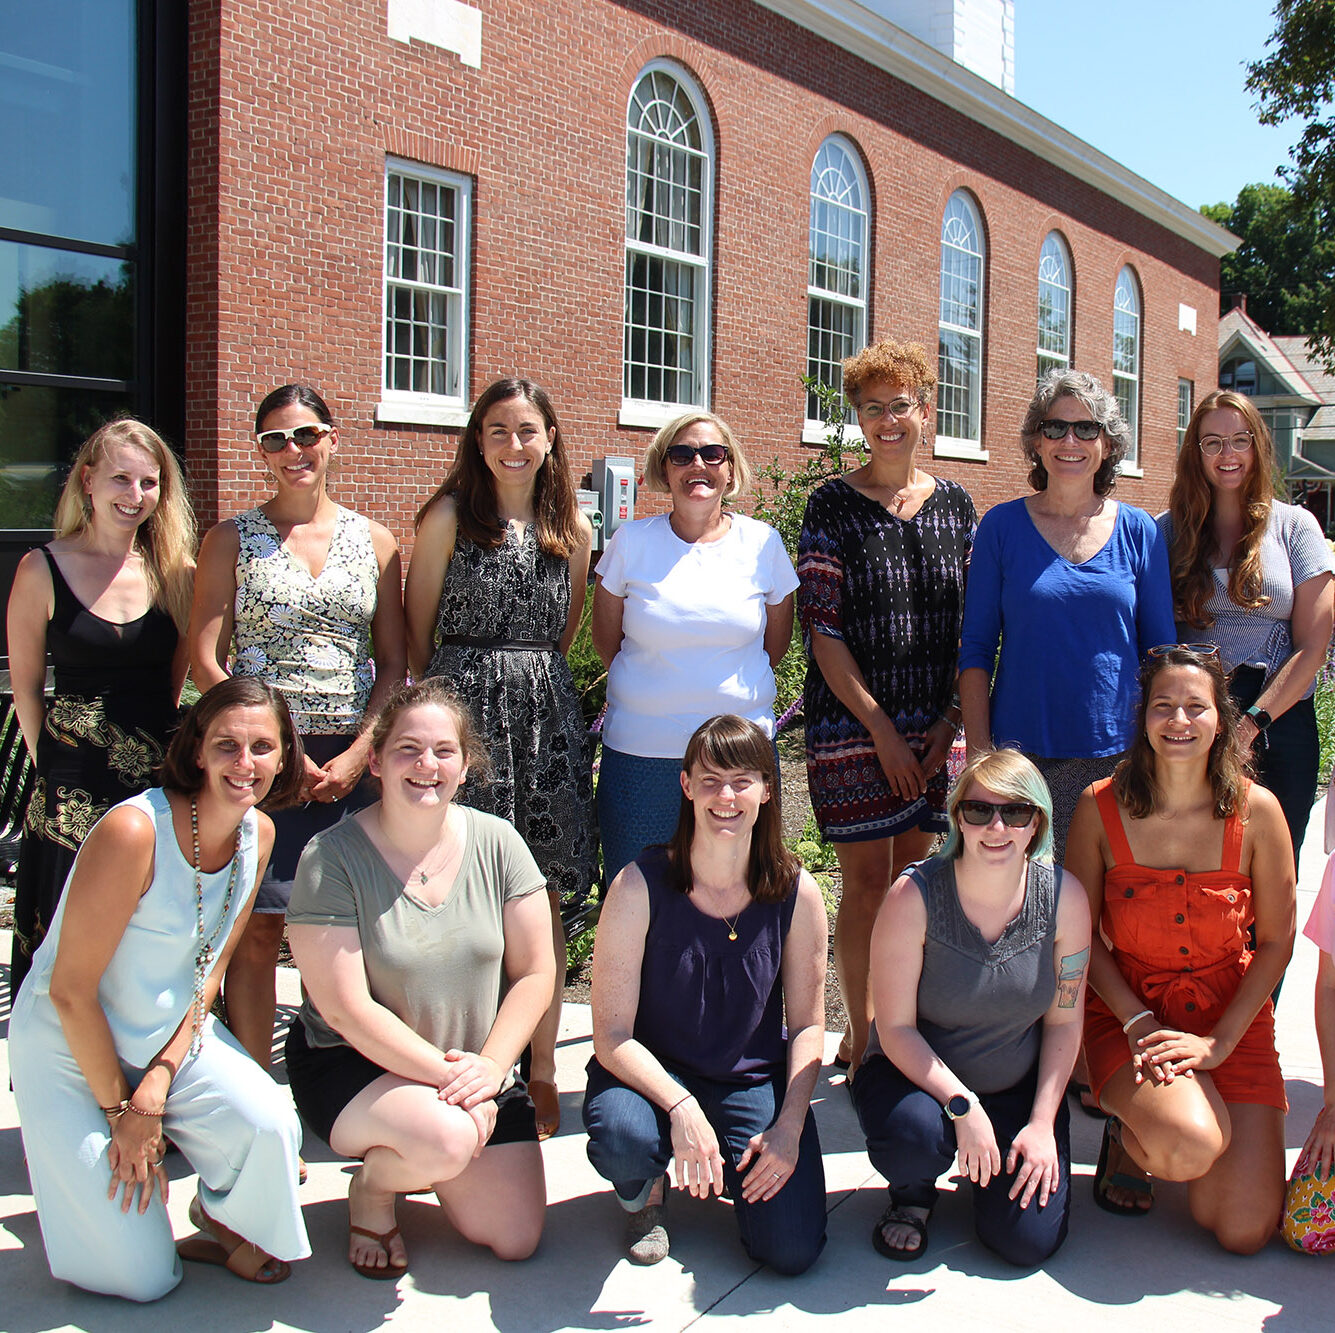 VWW staff members pose in a group photo after our annual retreat. Vermont Works for Women offers careers in nonprofit communications and marketing, development and fundraising, human resources, and program development.